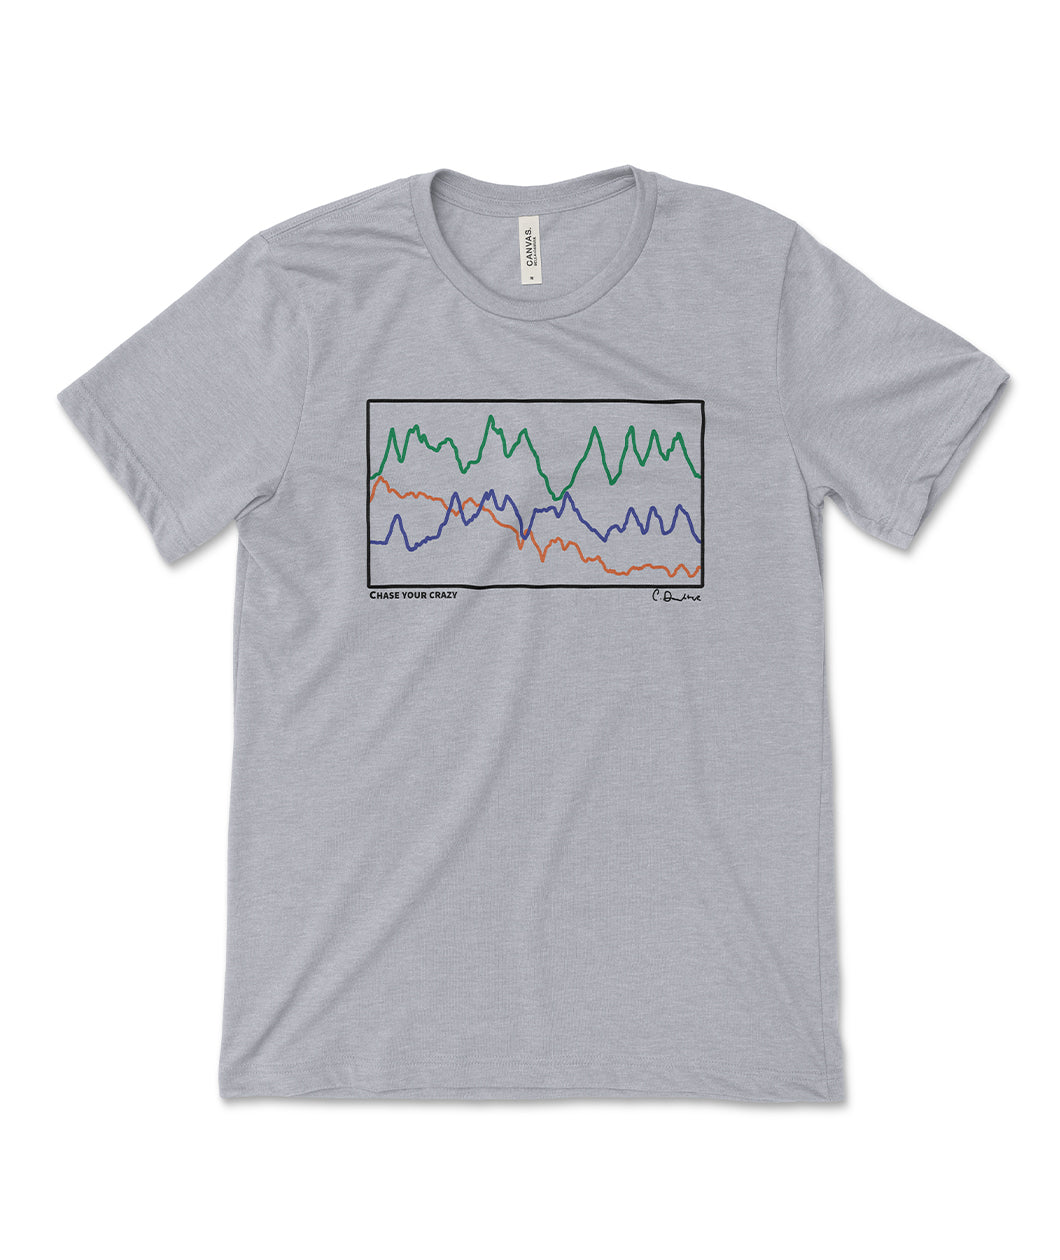 A grey t-shirt with a black rectangular outline around a chart of three different colored lines going up and down. Small text below reads 